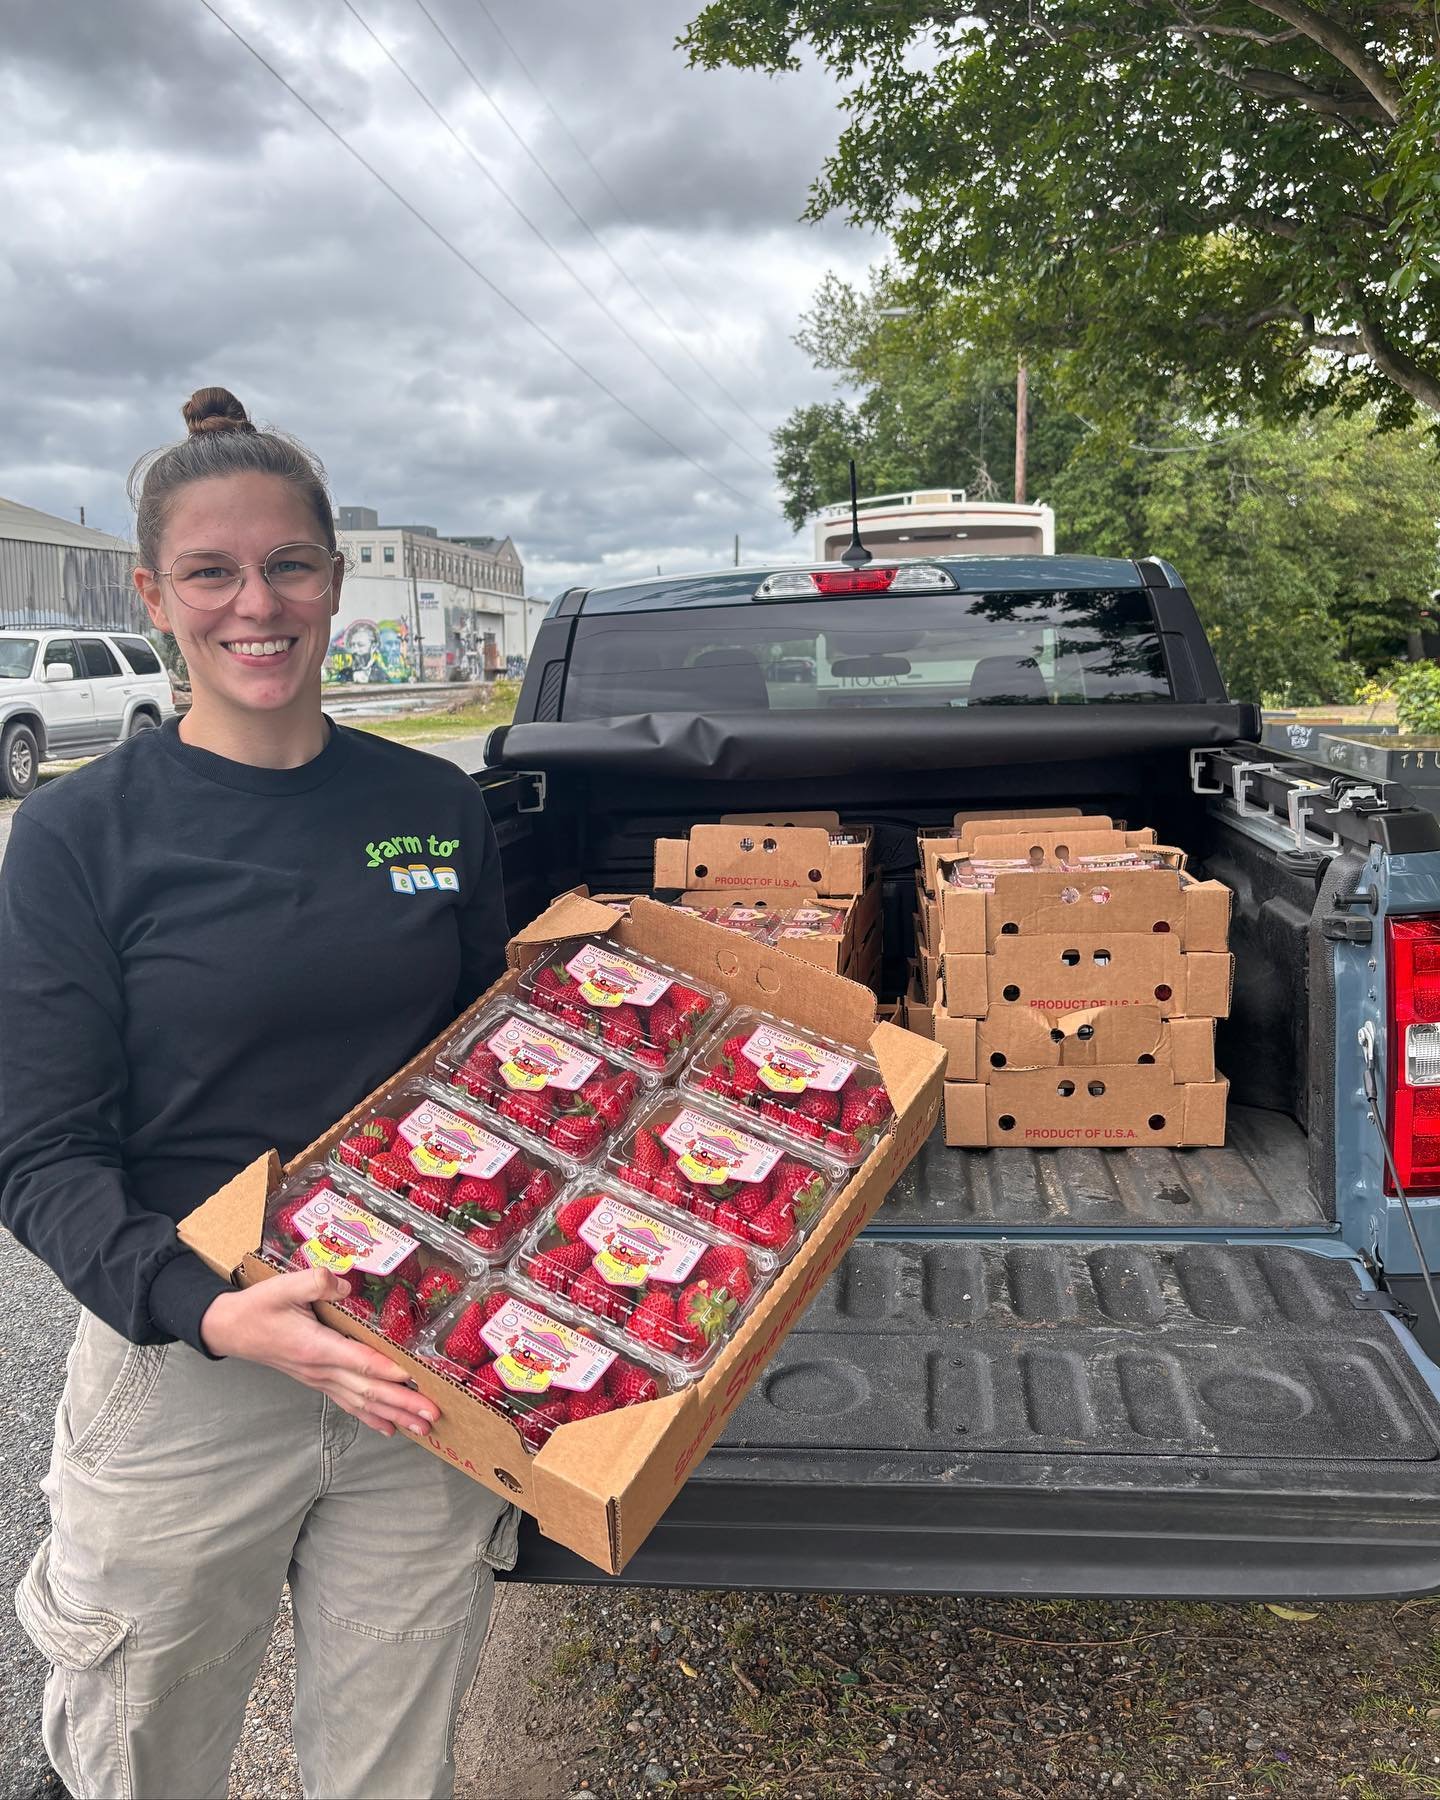 New Orleans Food Policy Action Council (NOLA FPAC) is now working in four networks and nine centers for the Farm to Early Care and Education program. Last month, along with @sproutnola we delivered 796 cartons of strawberries to centers! All networks